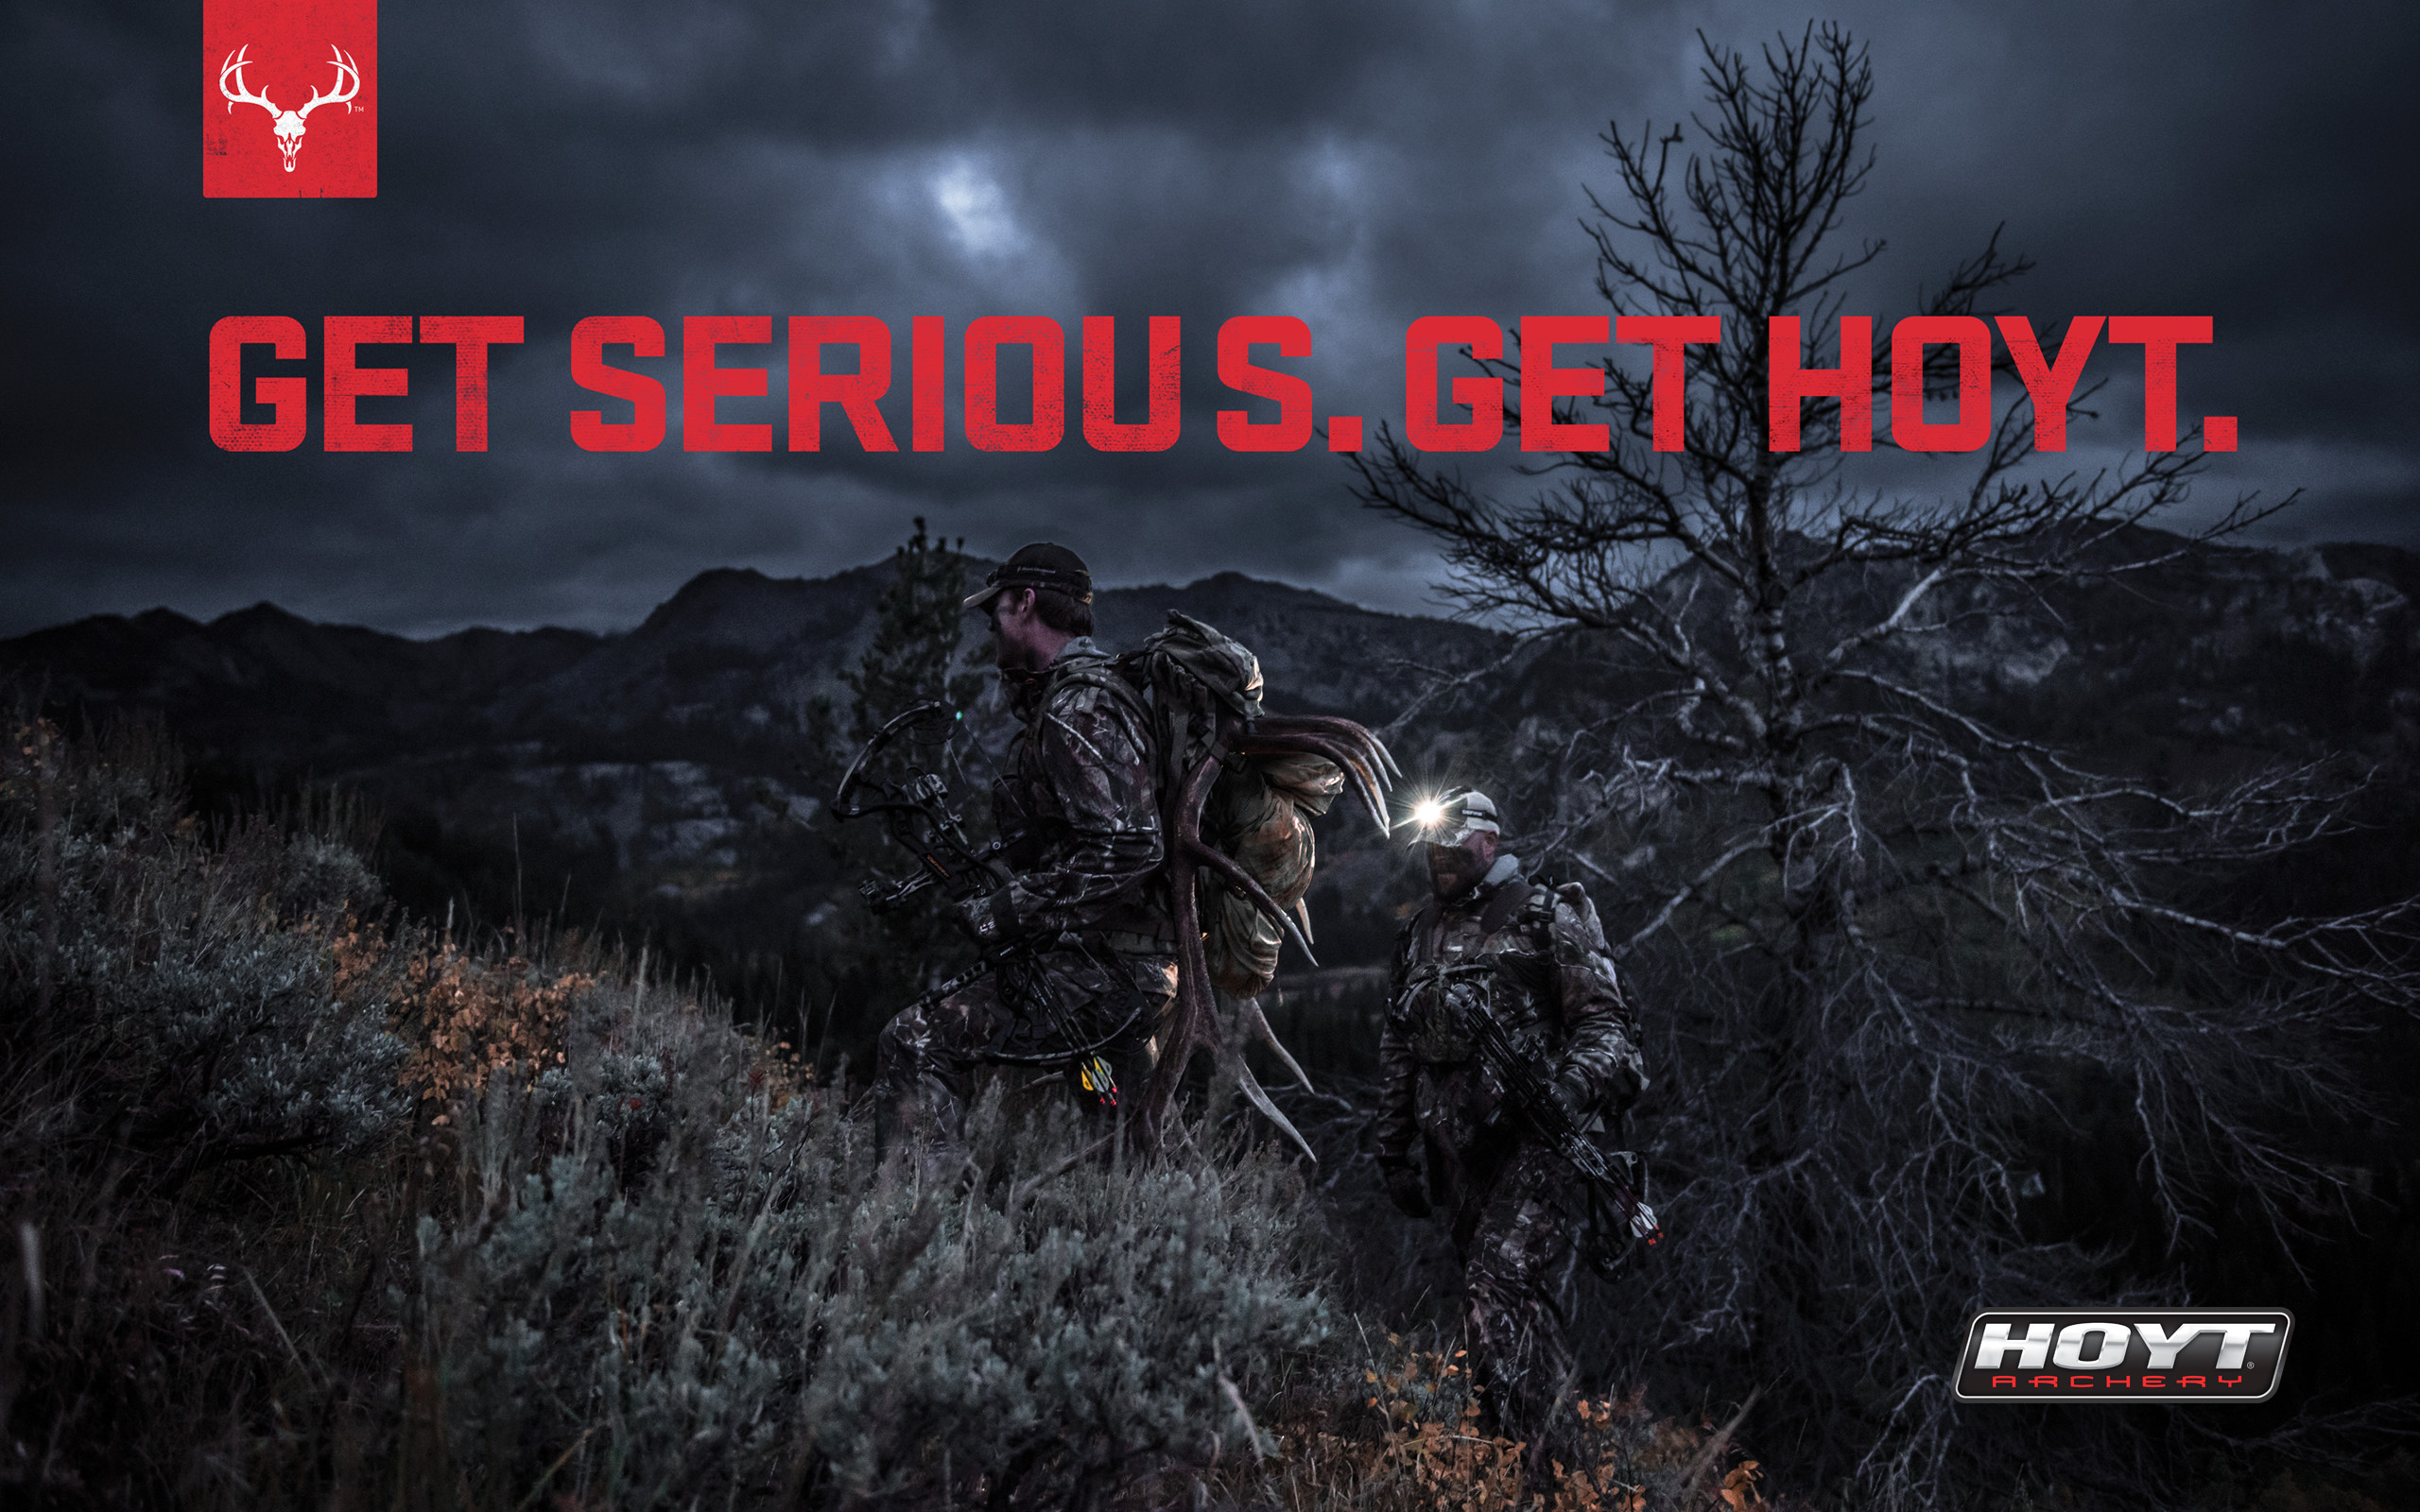 2560x1600 bowhunting wallpaper ignite wallpaper get serious get hoyt traditional .  Hoyt Archery Wallpaper